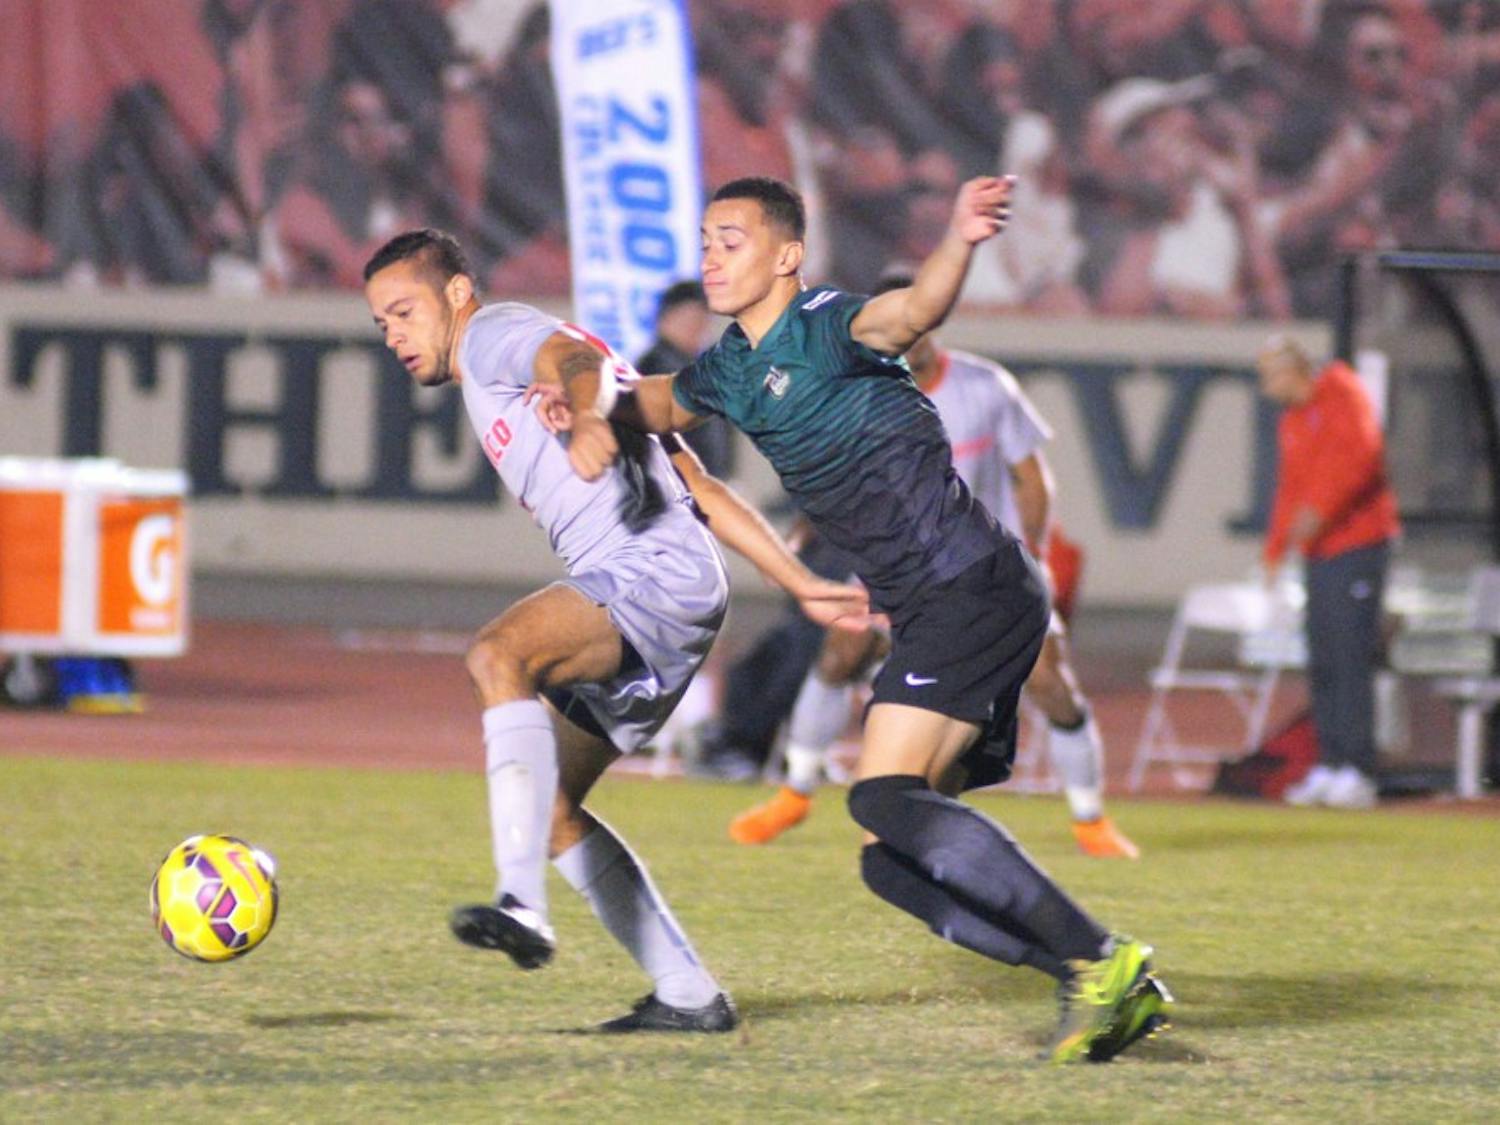 Junior forward Niko Hansen fights for the ball against a Charlotte player at the UNM Soccer Complex Tuesday, Oct. 27. The Lobos tied with Florida International this past weekend and play Florida National Friday, Nov. 6 at 7 p.m..